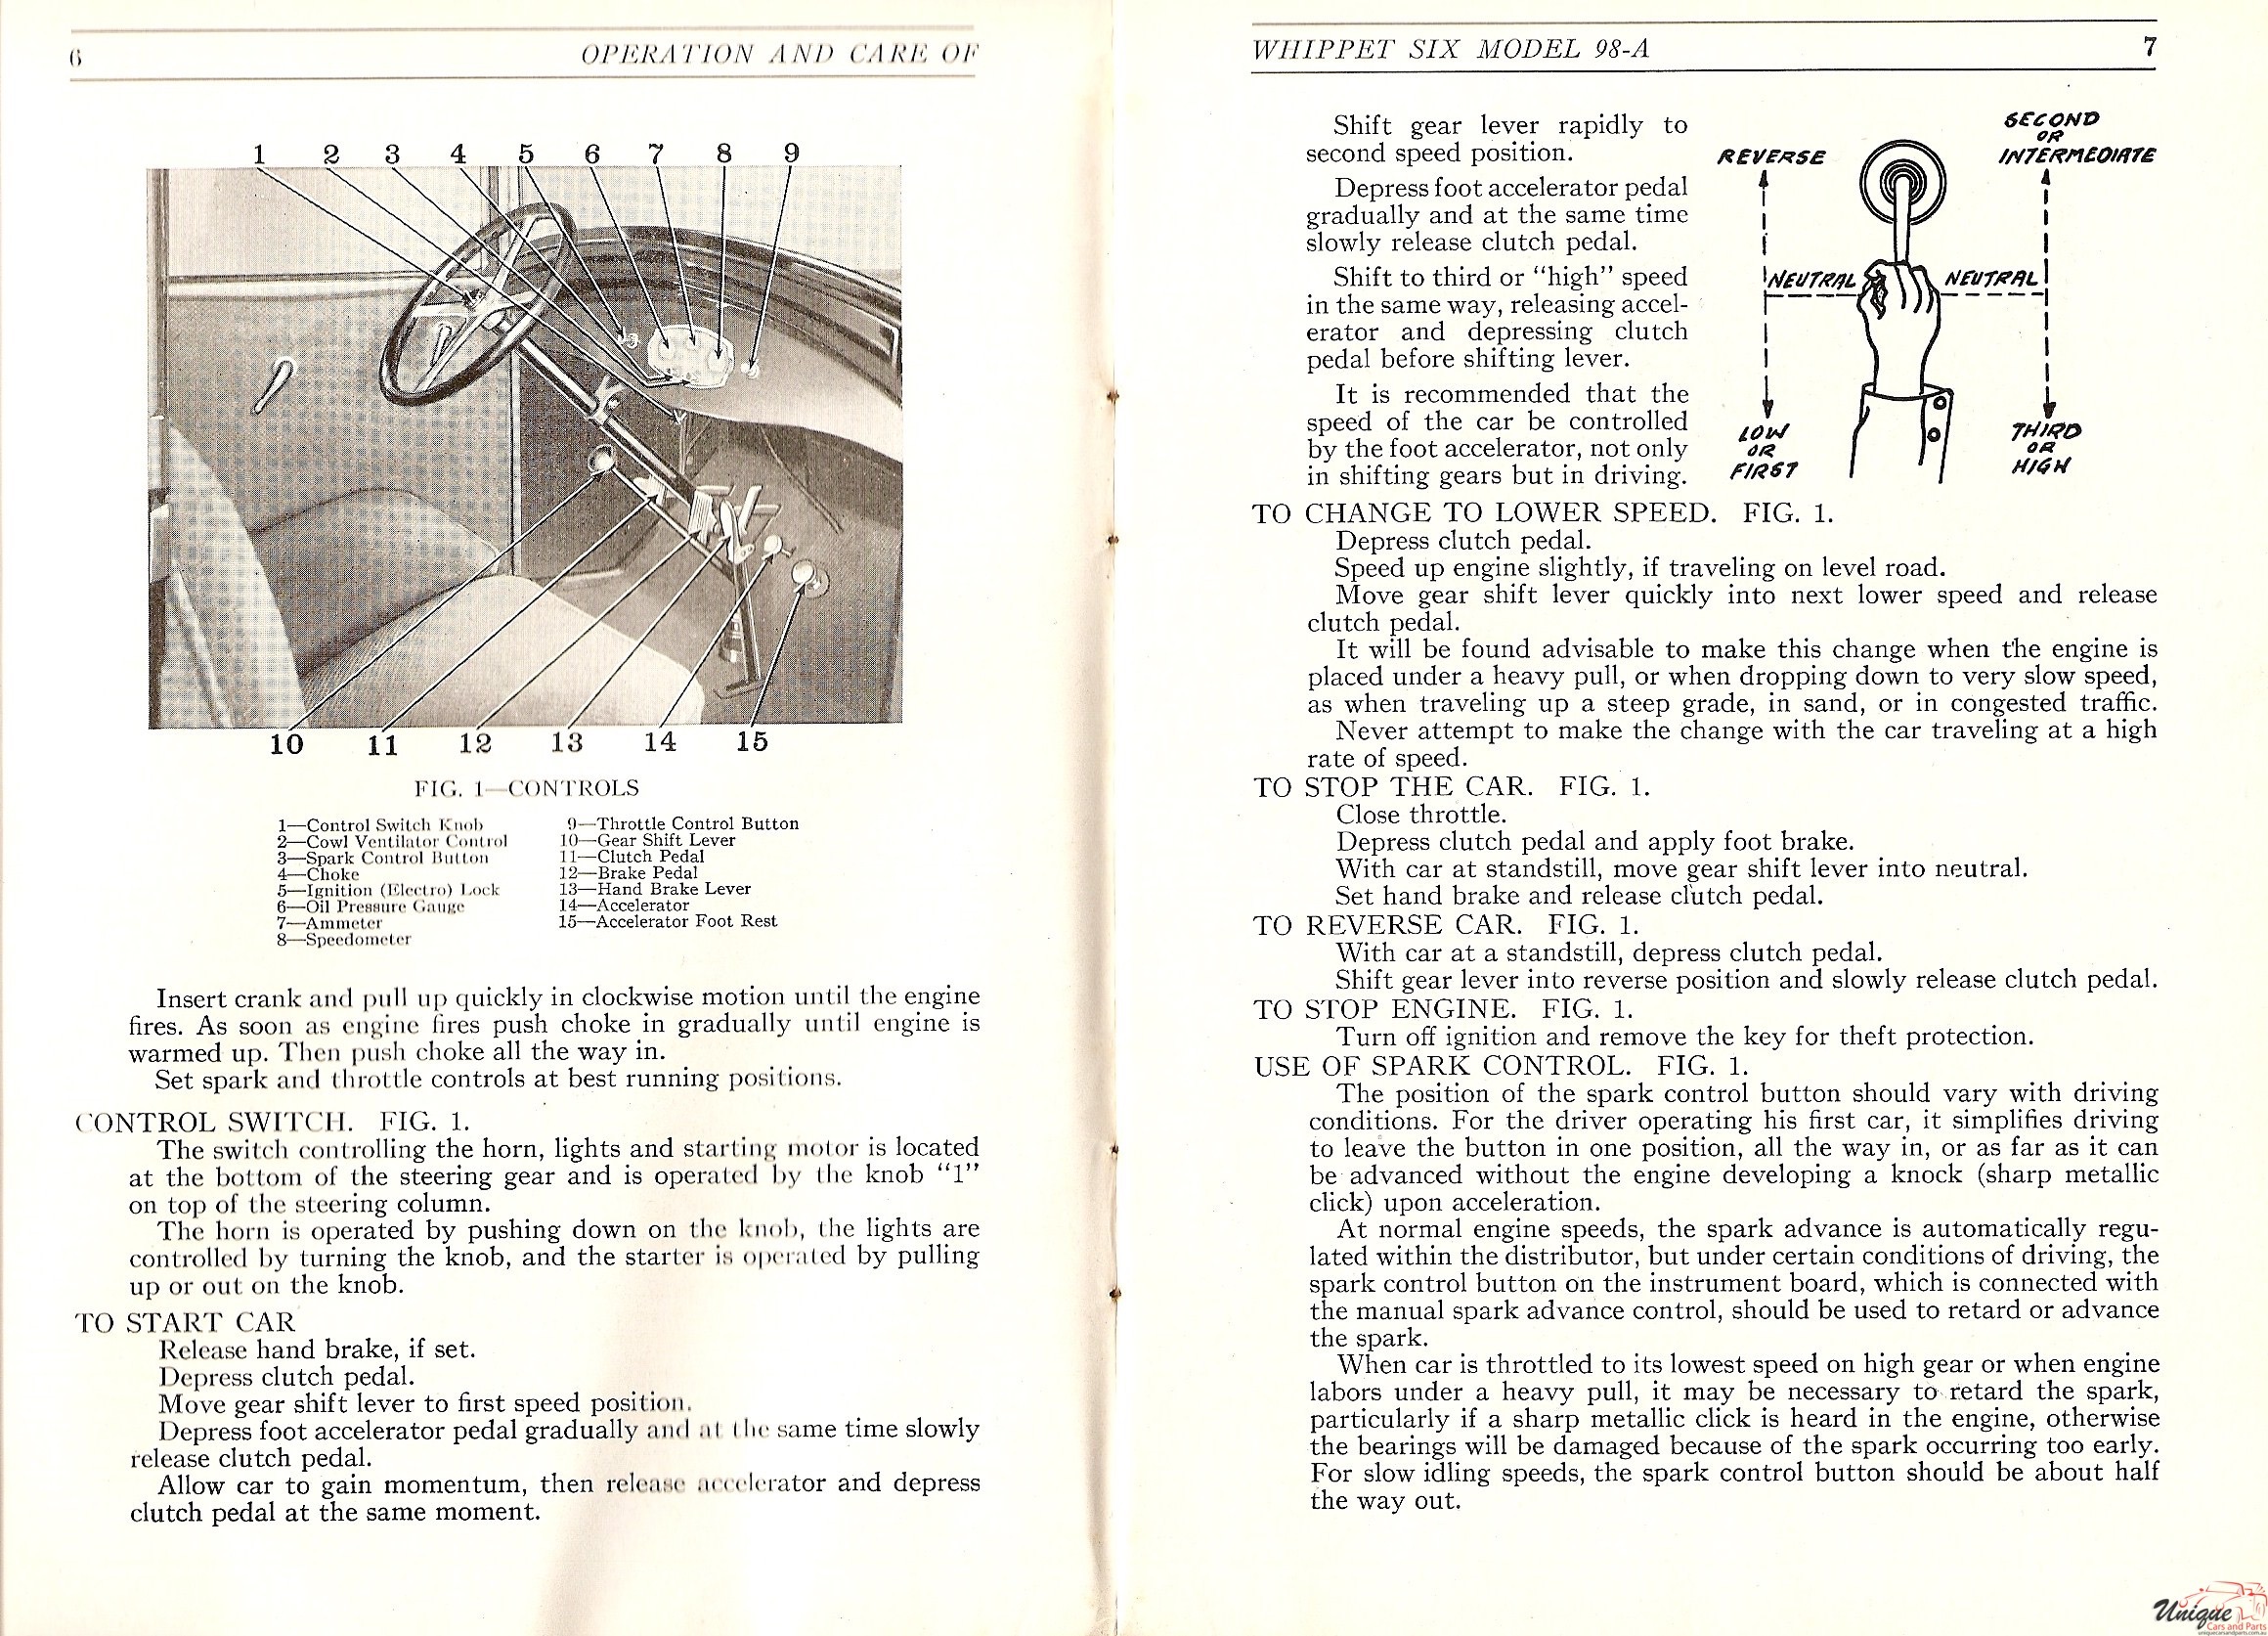 1929 Whippet Operator Manual Page 11